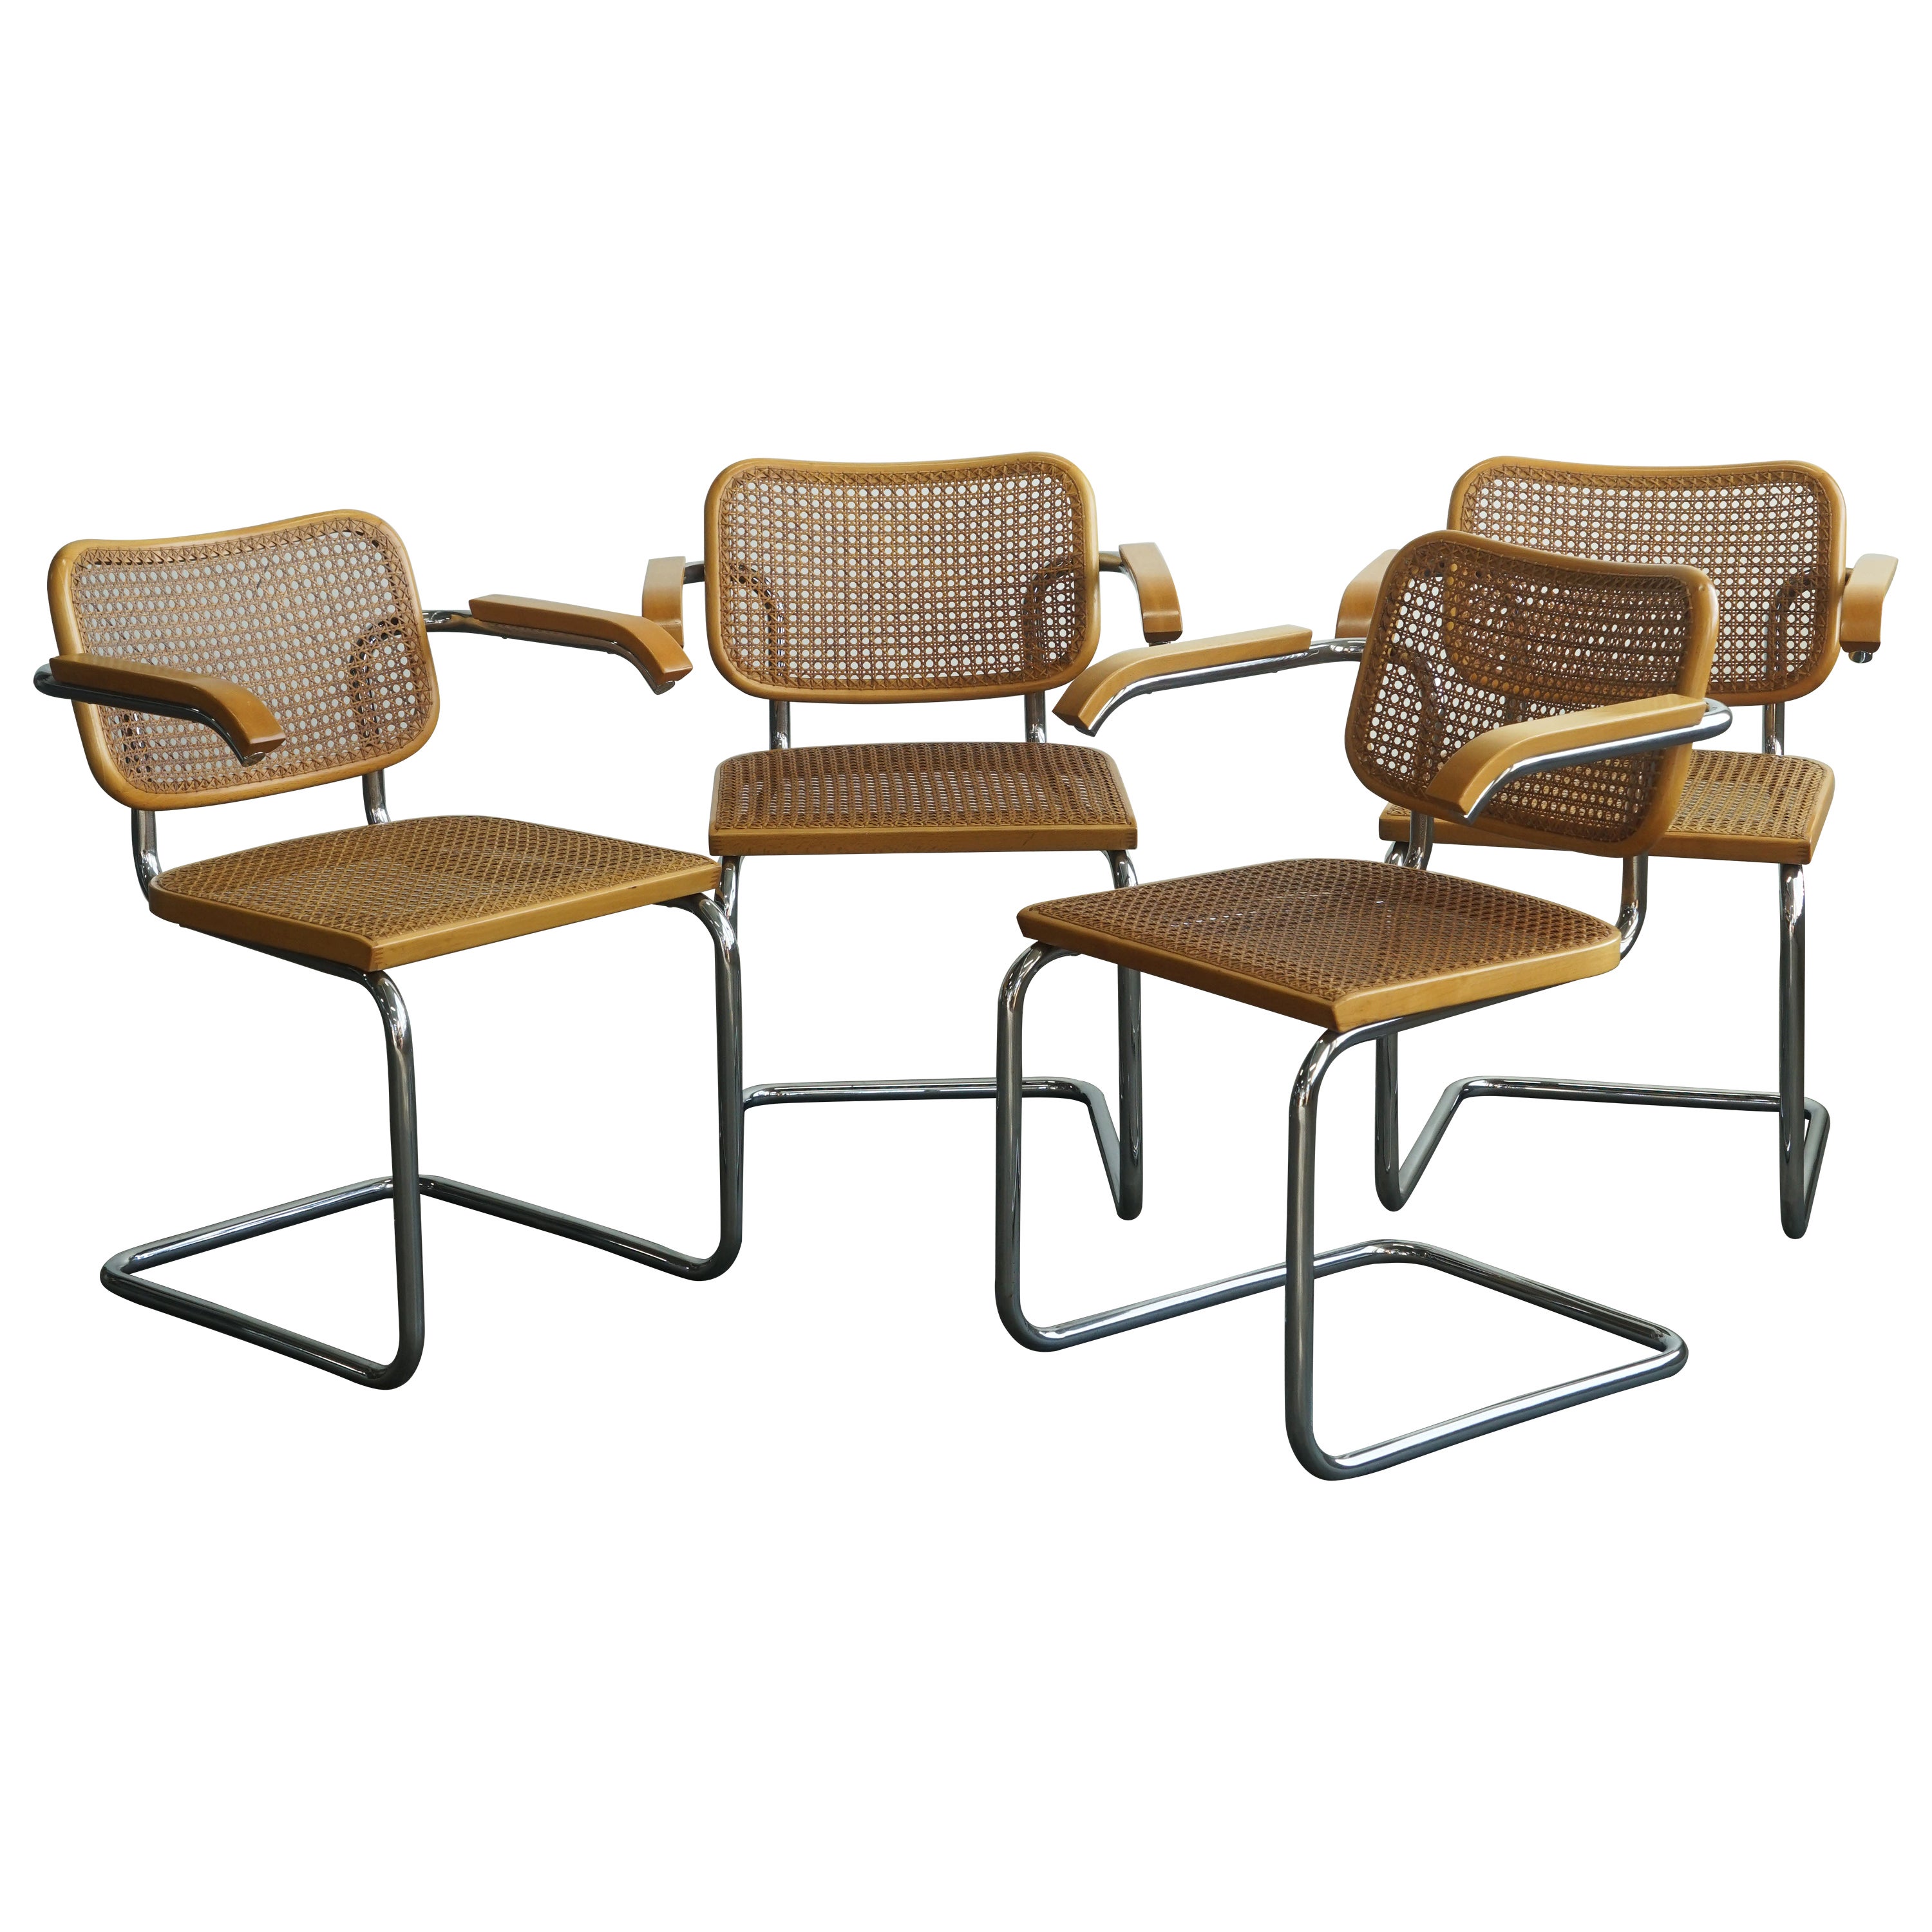 Set of 4 1960's Marcel Breuer Cesca chairs with arms, Stendig labels For Sale